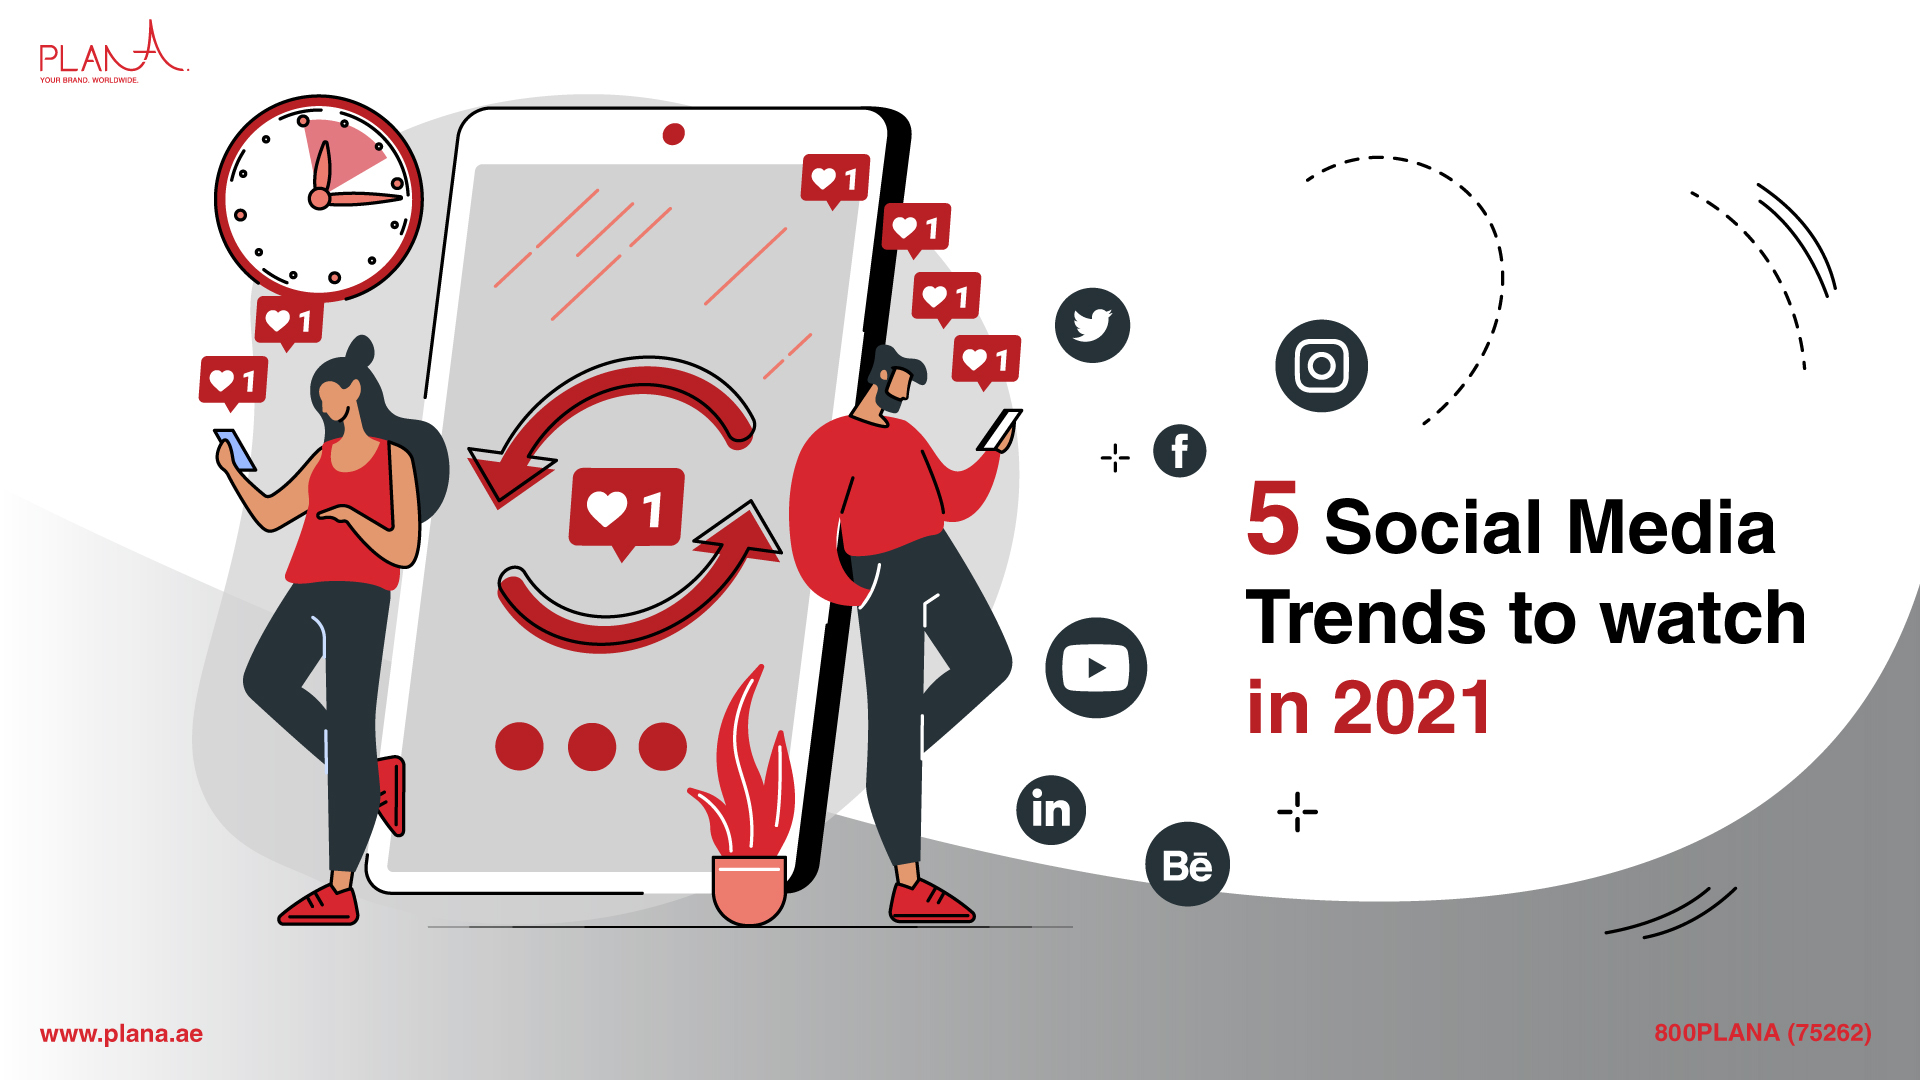 5 Social Media Trends to Watch in 2021